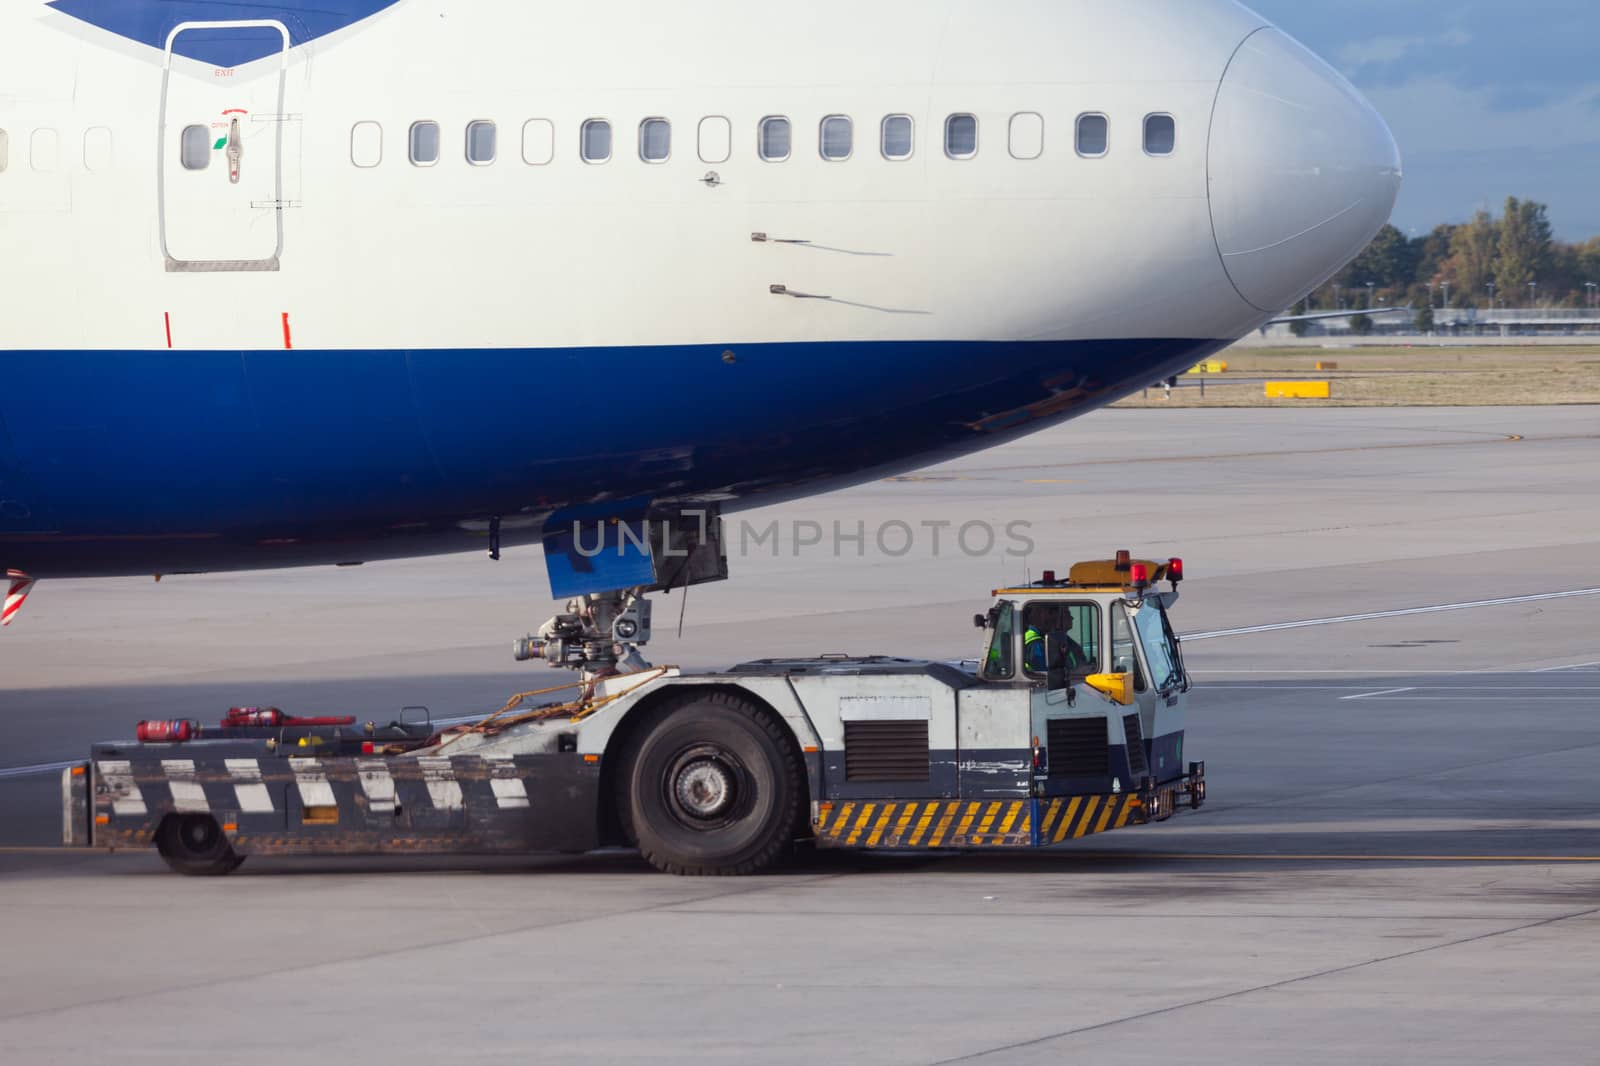 Large aircraft being pulled by airport tug tractor taxing on airfield into docking position for passenger boarding the airplane